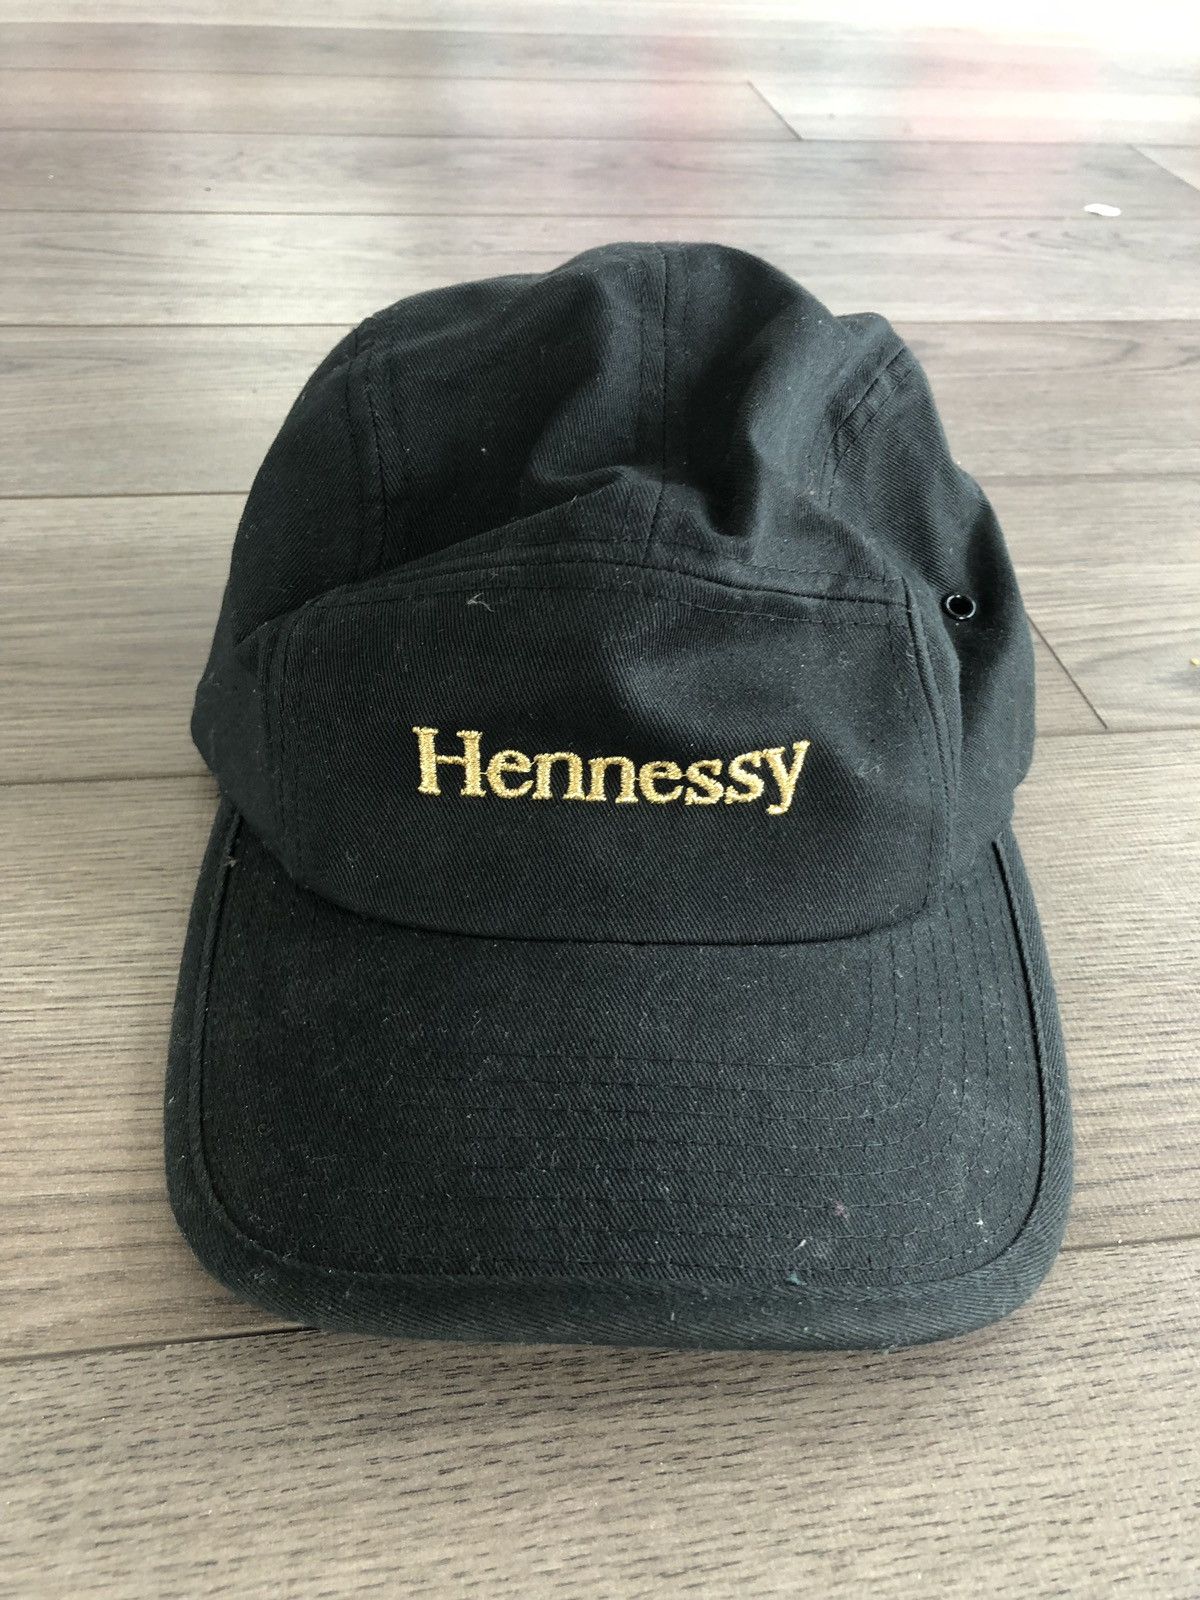 Hennessy Hennessy Strap Hat | Grailed